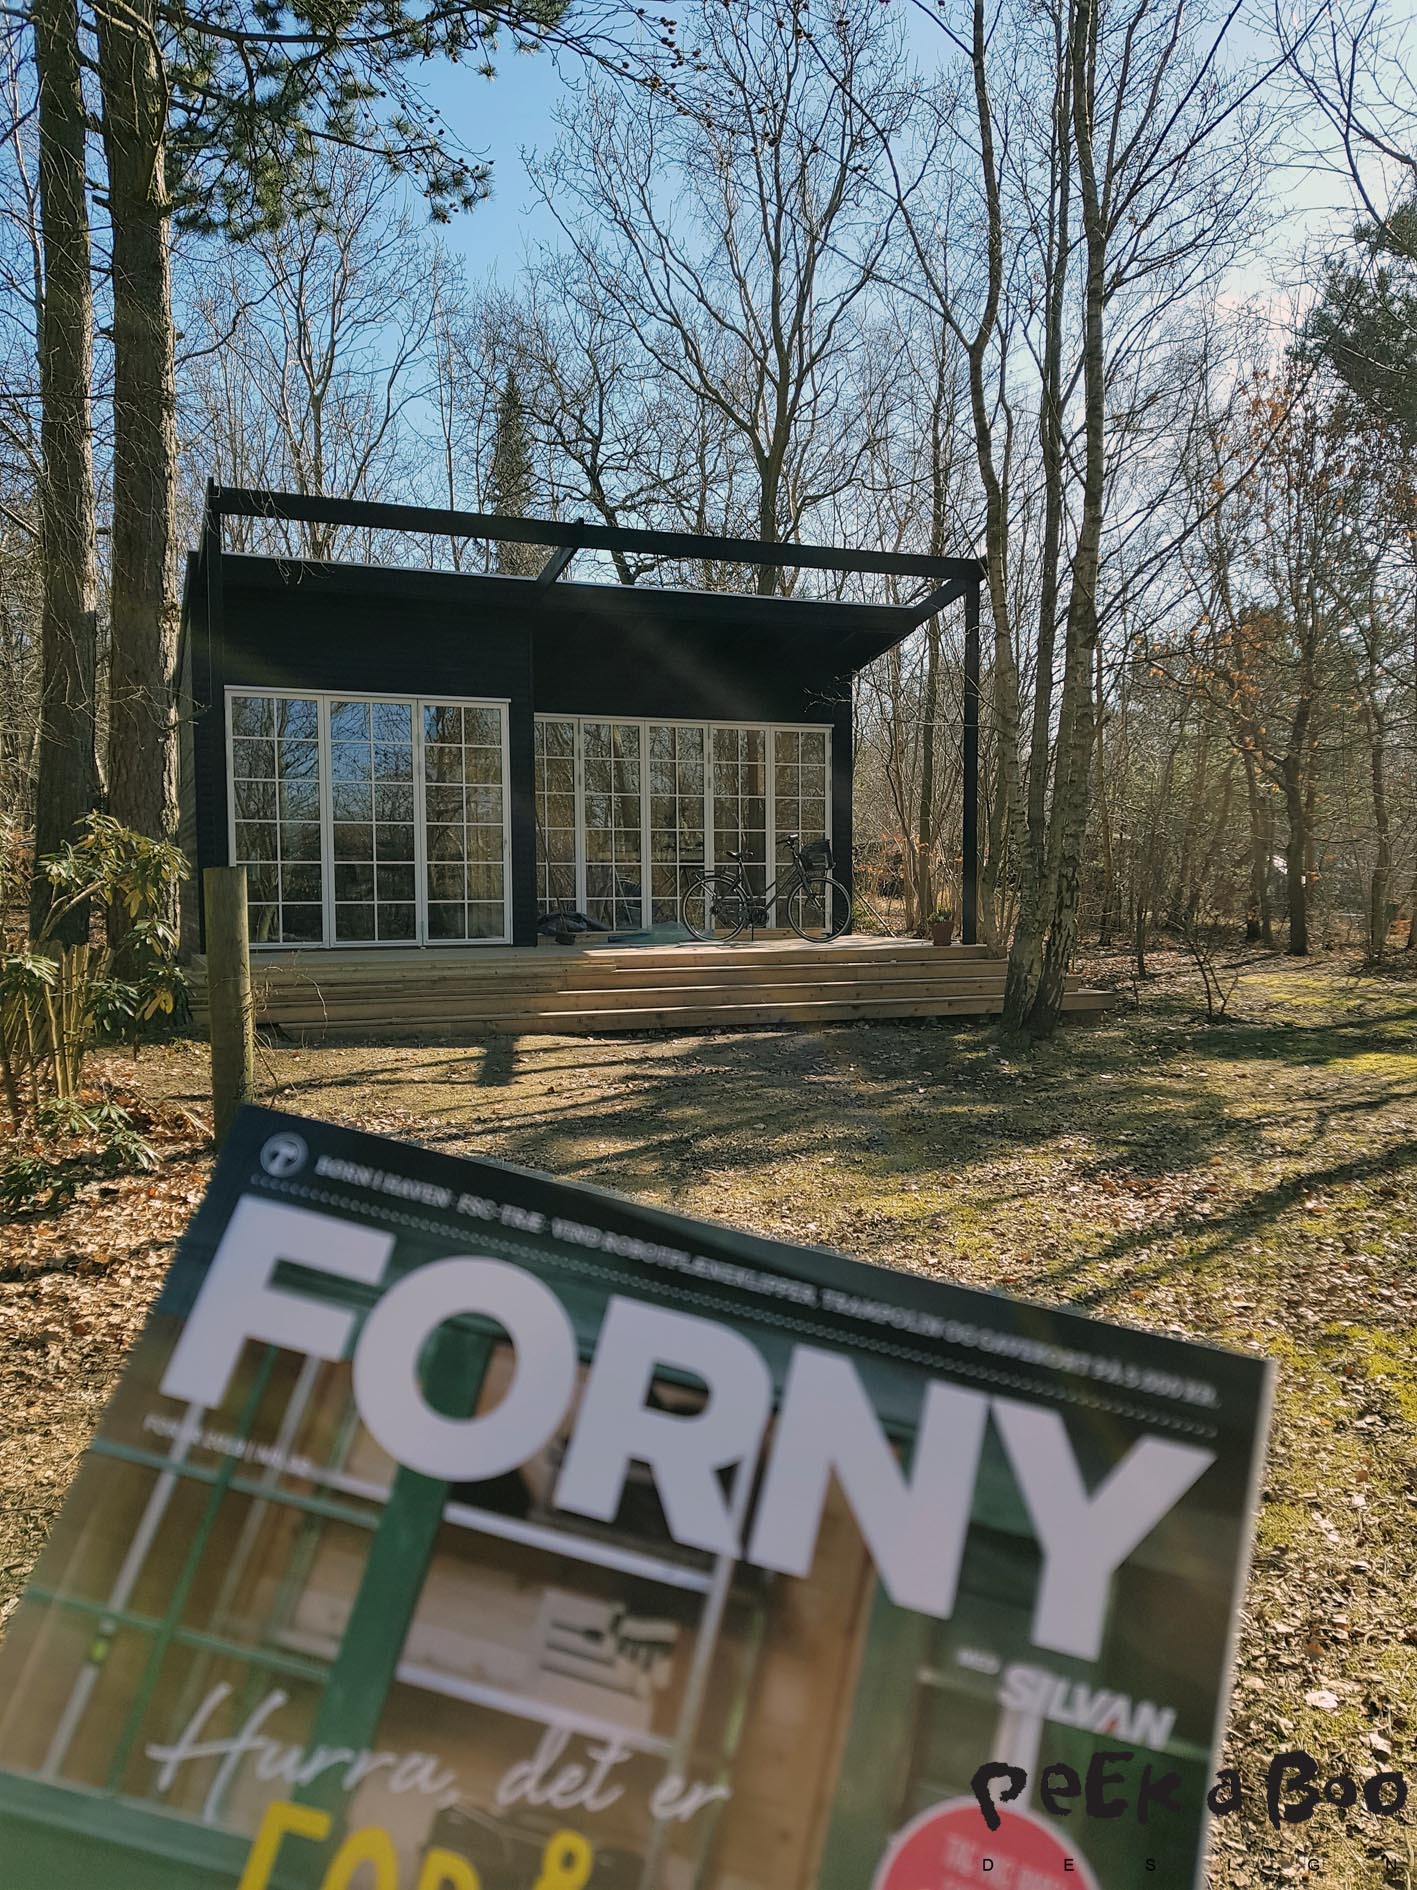 The magazine FORNY features the first part of how to build this annex.